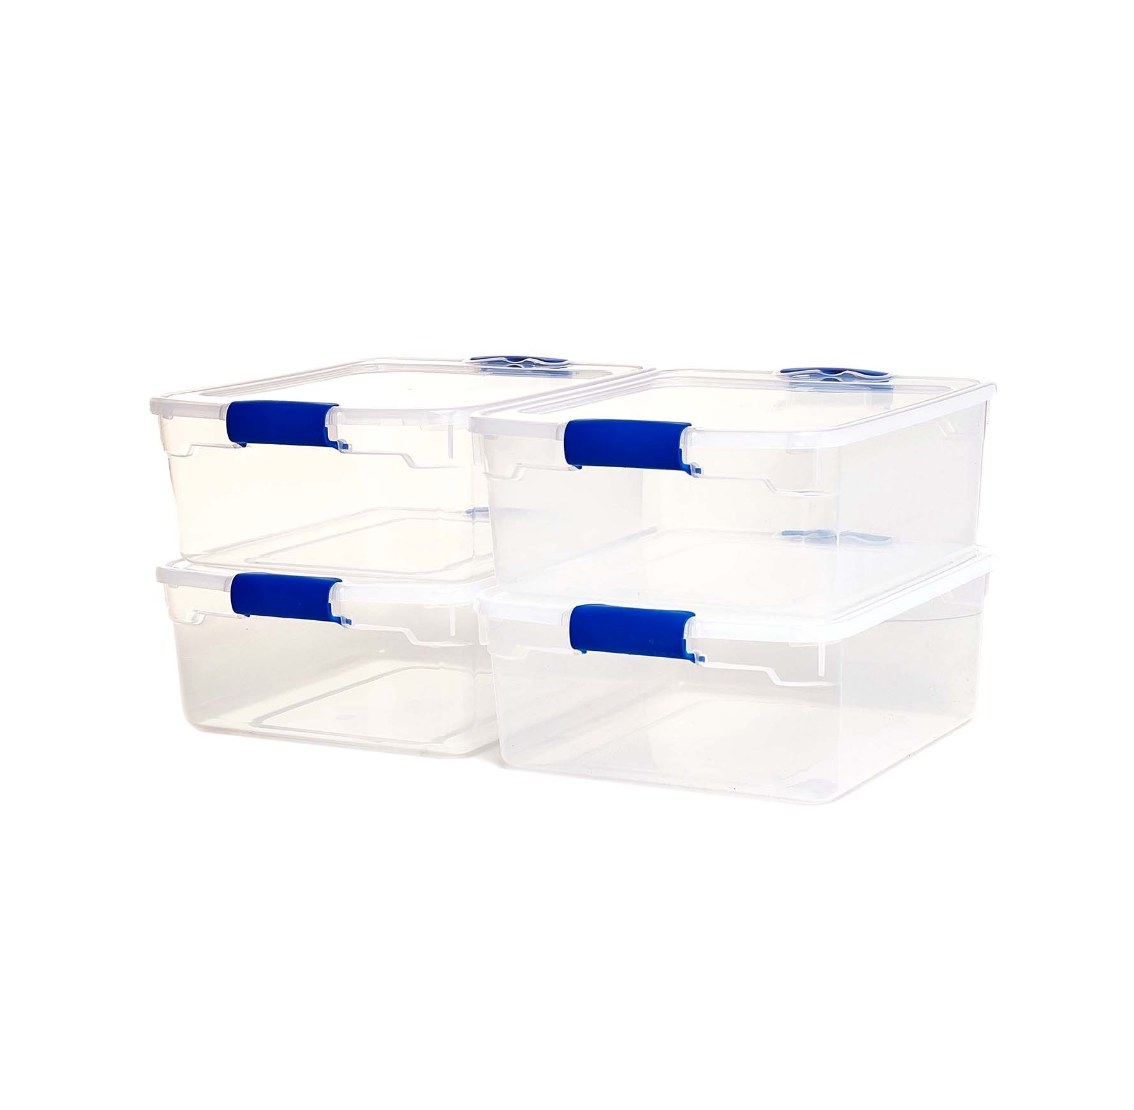 The set of four latching storage container in clear